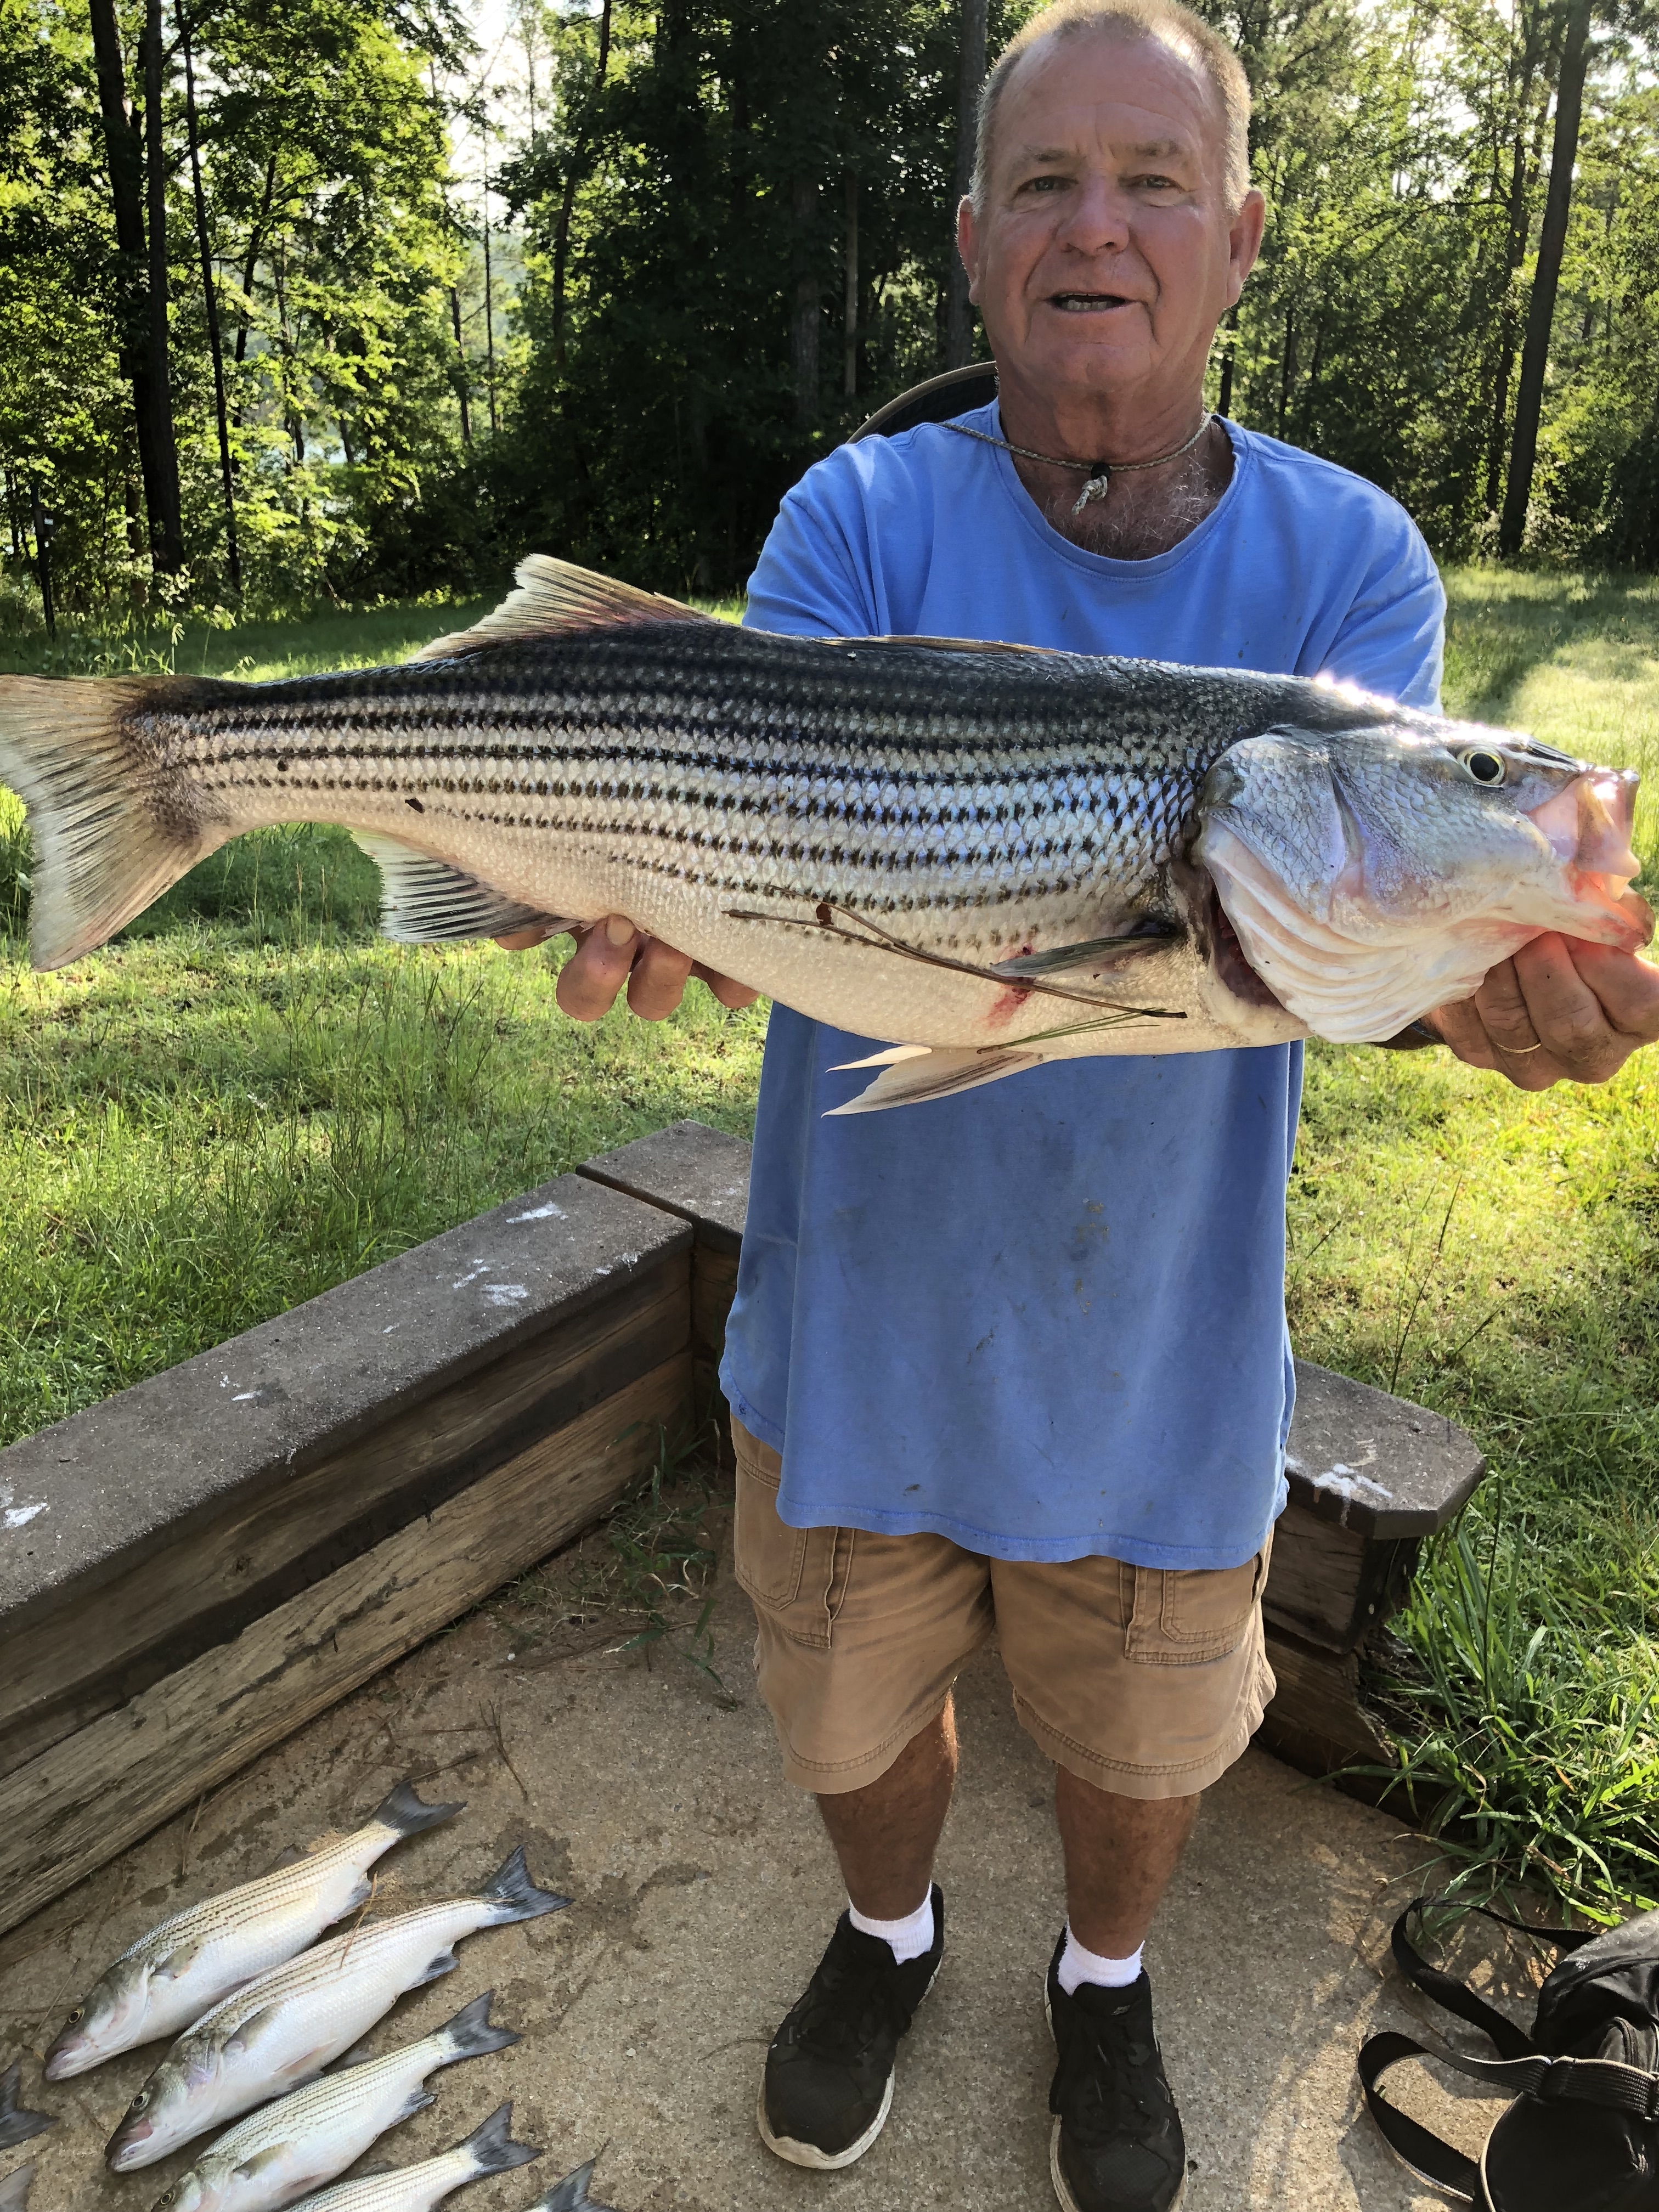 June 26, 2018Capt. Billy with his 12 pound StriperIMG_2238